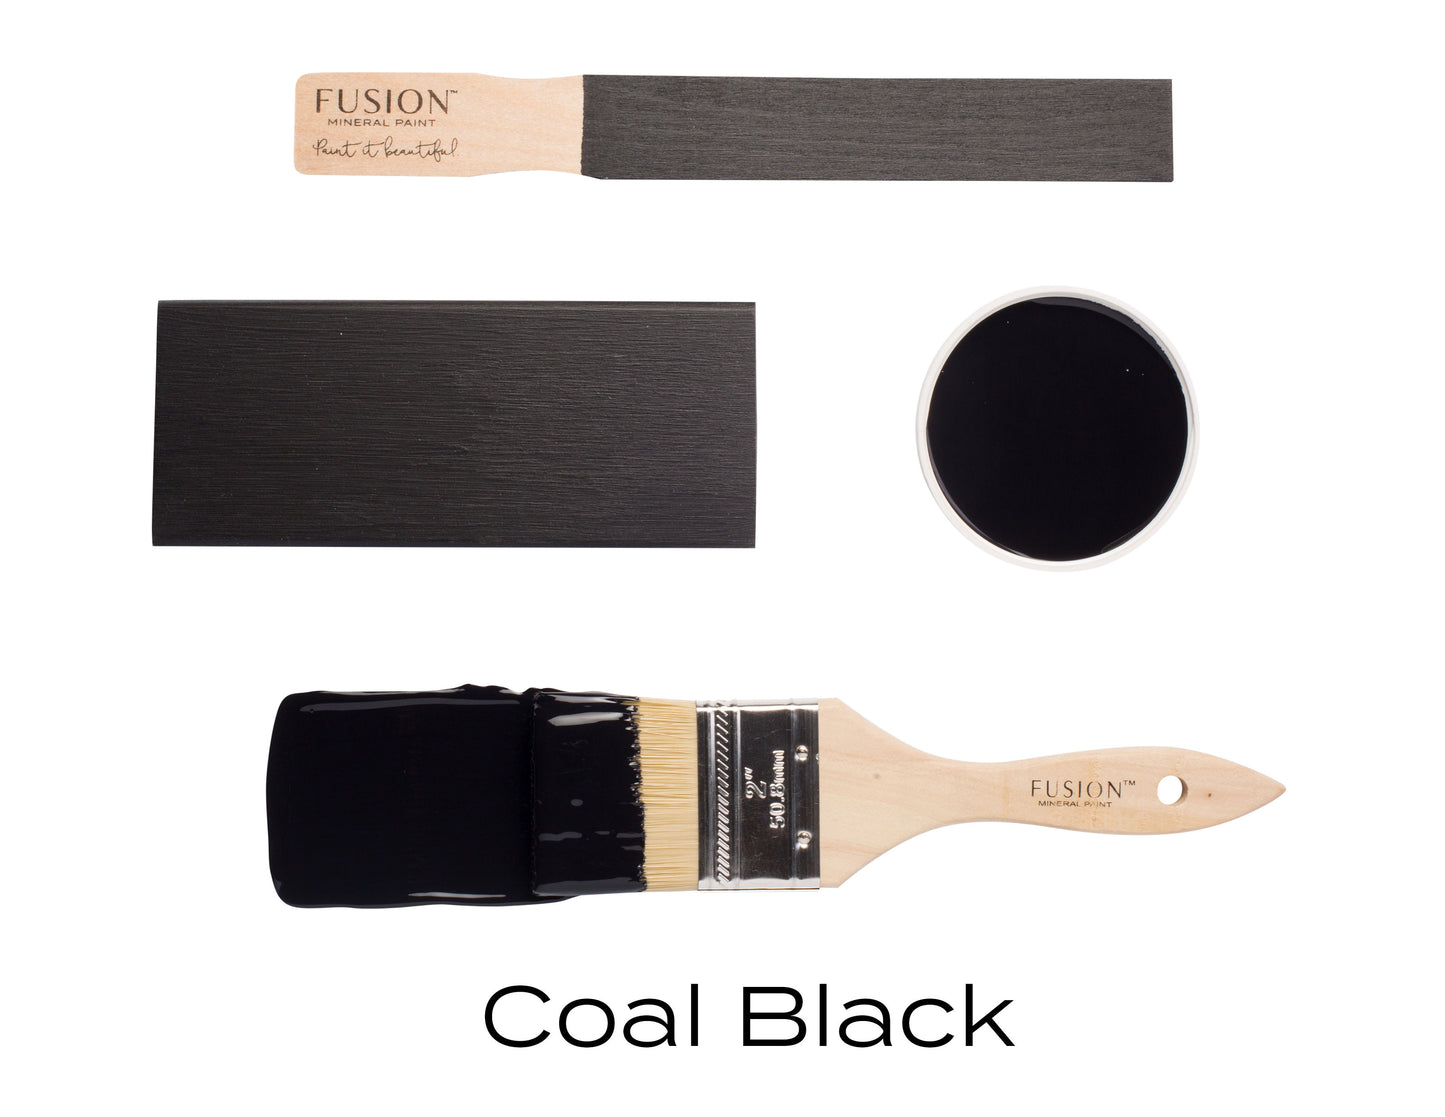 Coal Black by Fusion